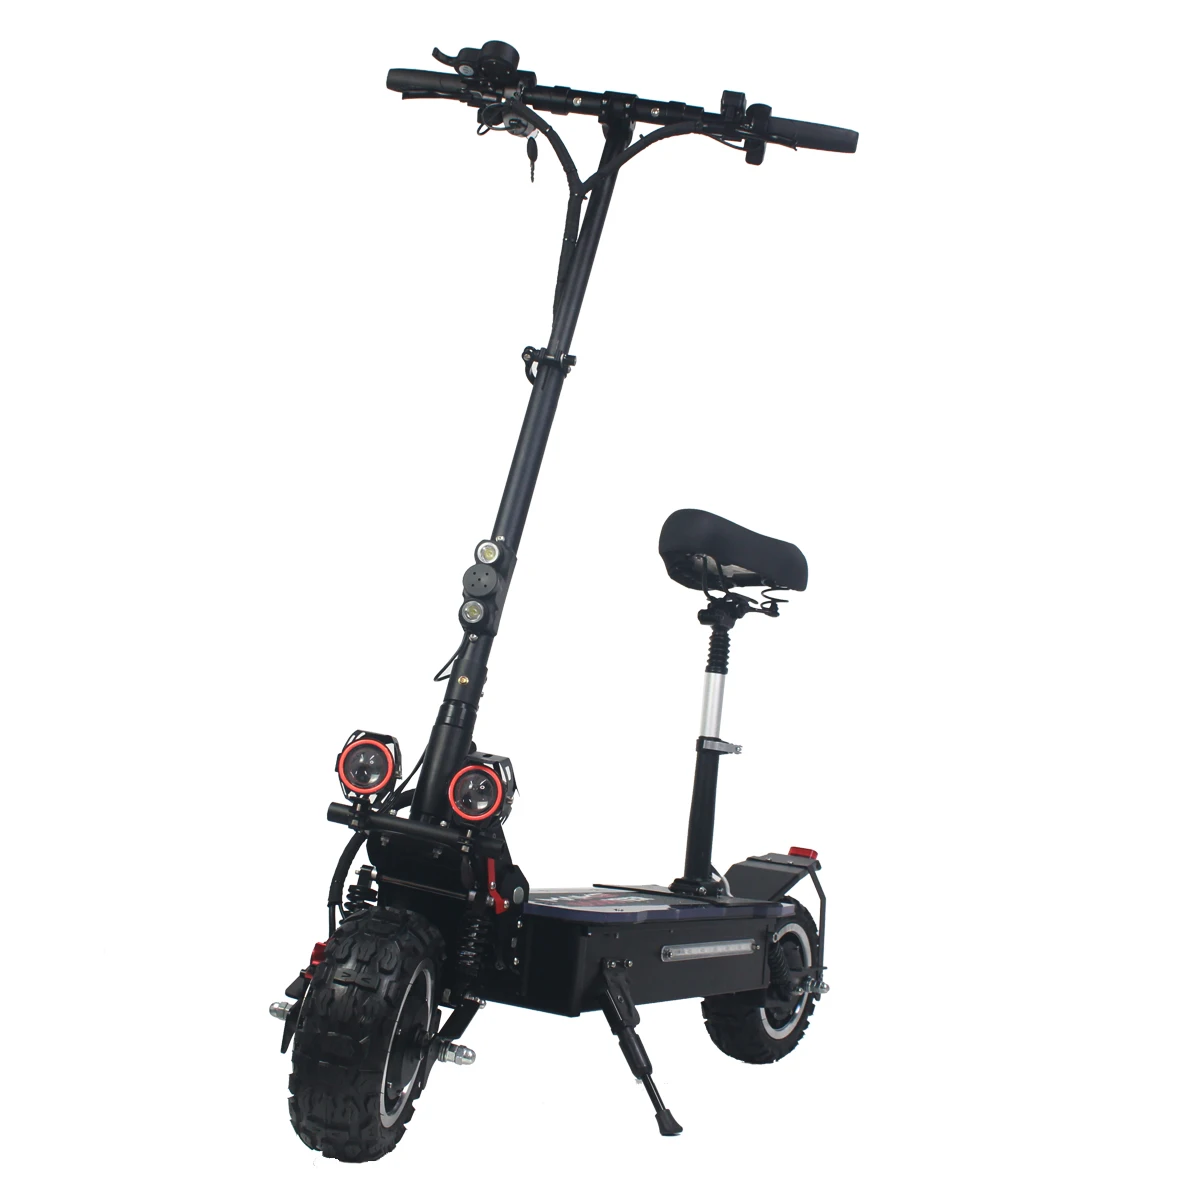 

Wholesale china price maike kk4s 11 inch fat tire 60v 3200w powerful dual motor high speed up electric kick scooter